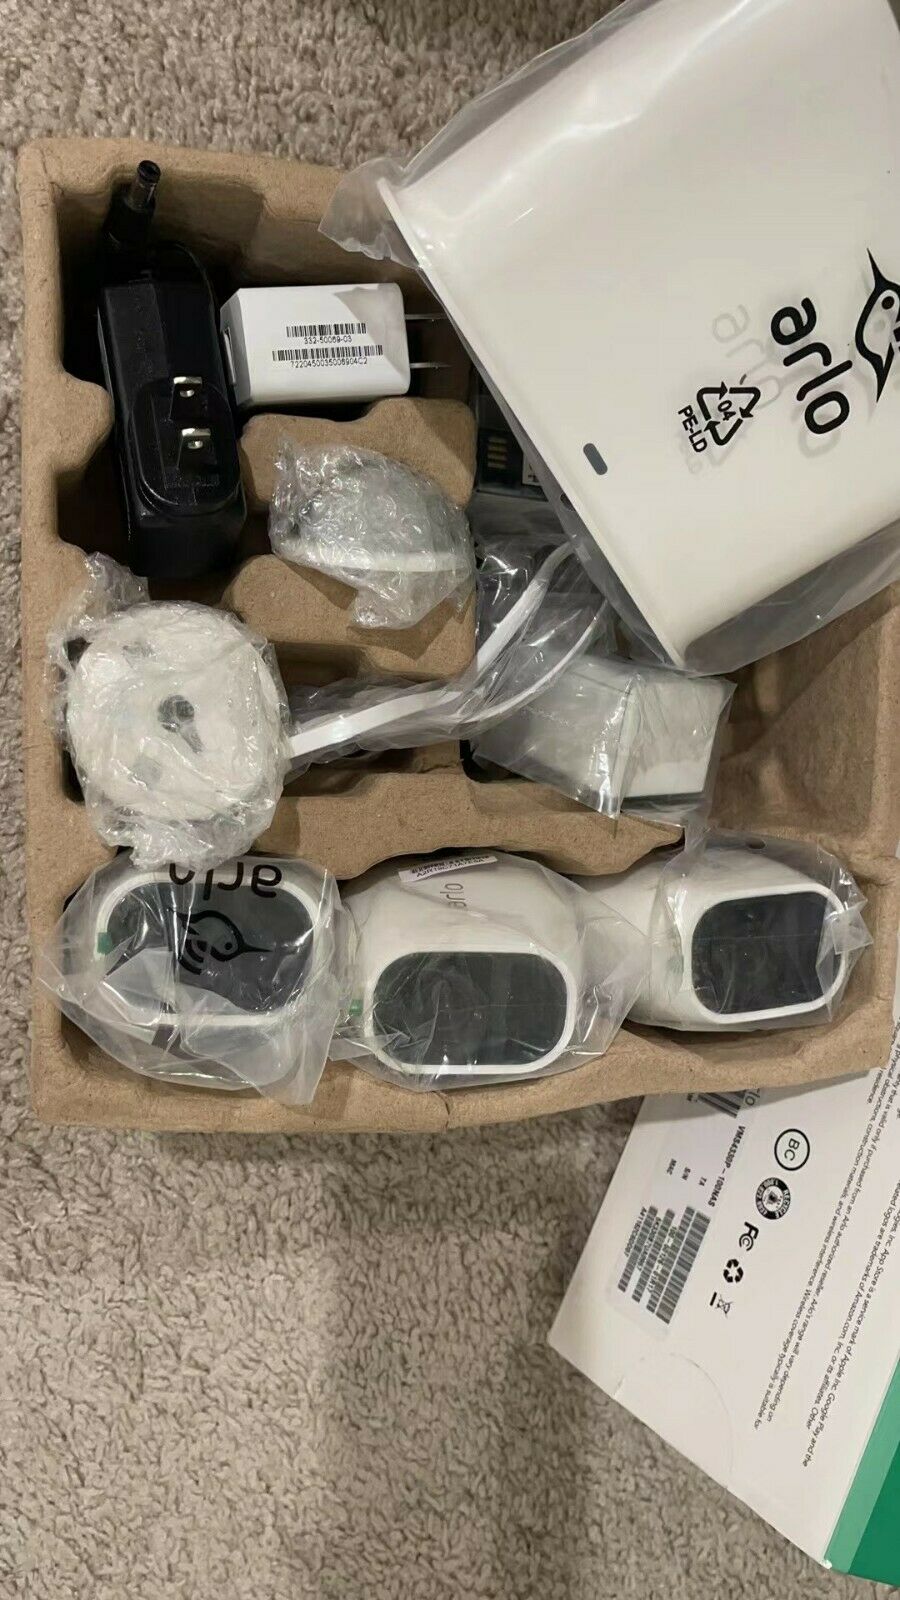 Arlo Pro 2 VMS4330P-100NAS Wireless Home Security Camera System never used